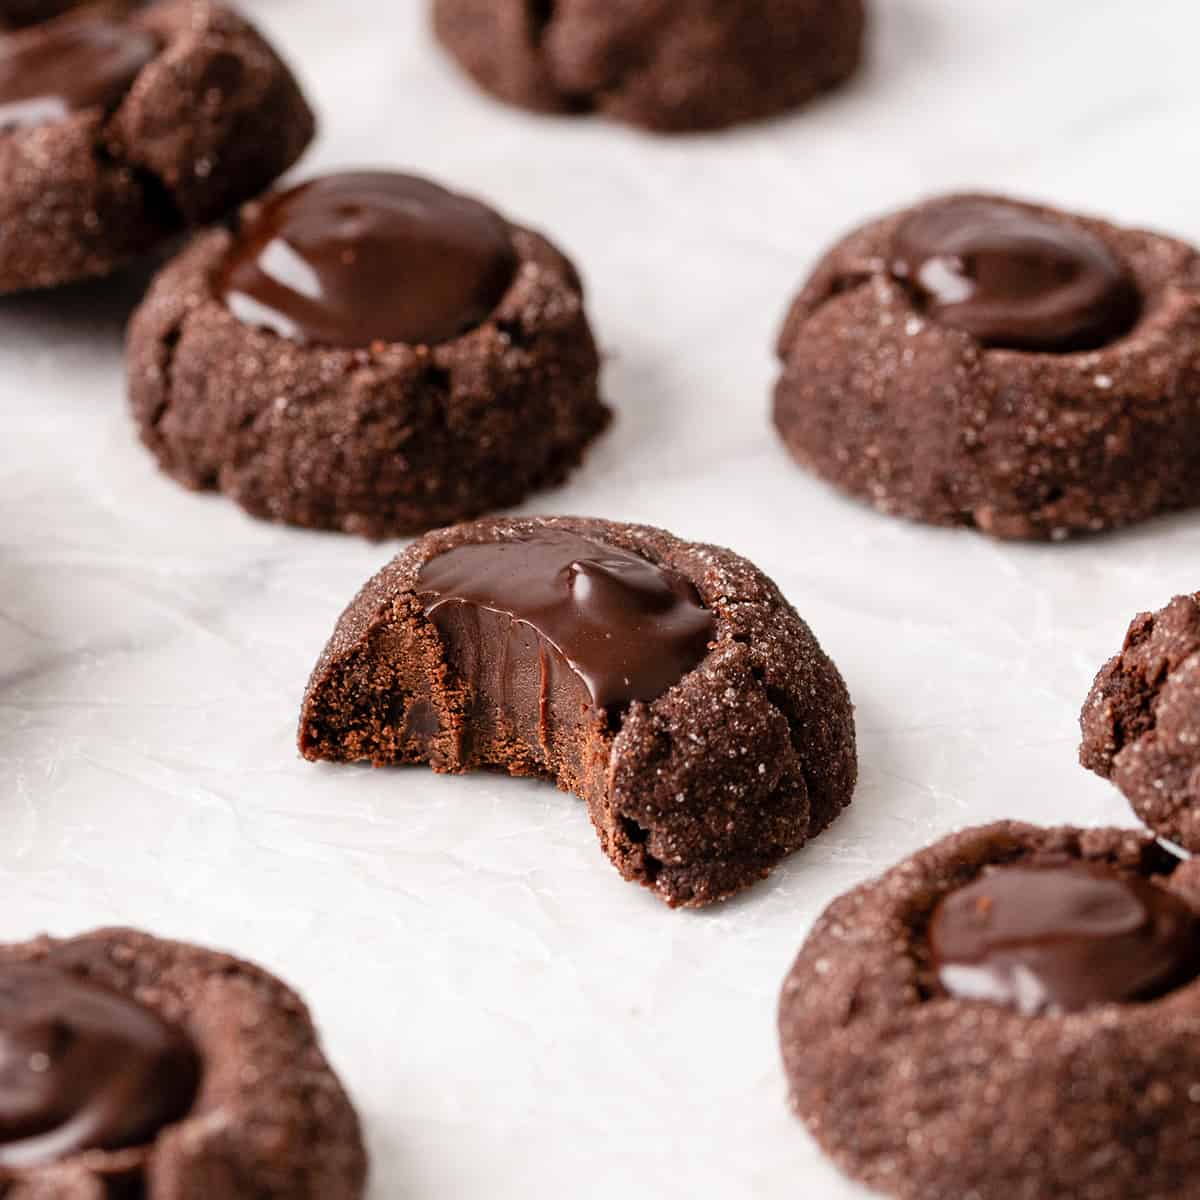 5 Chocolate Thumbprint Cookies, one with a bite taken out of it